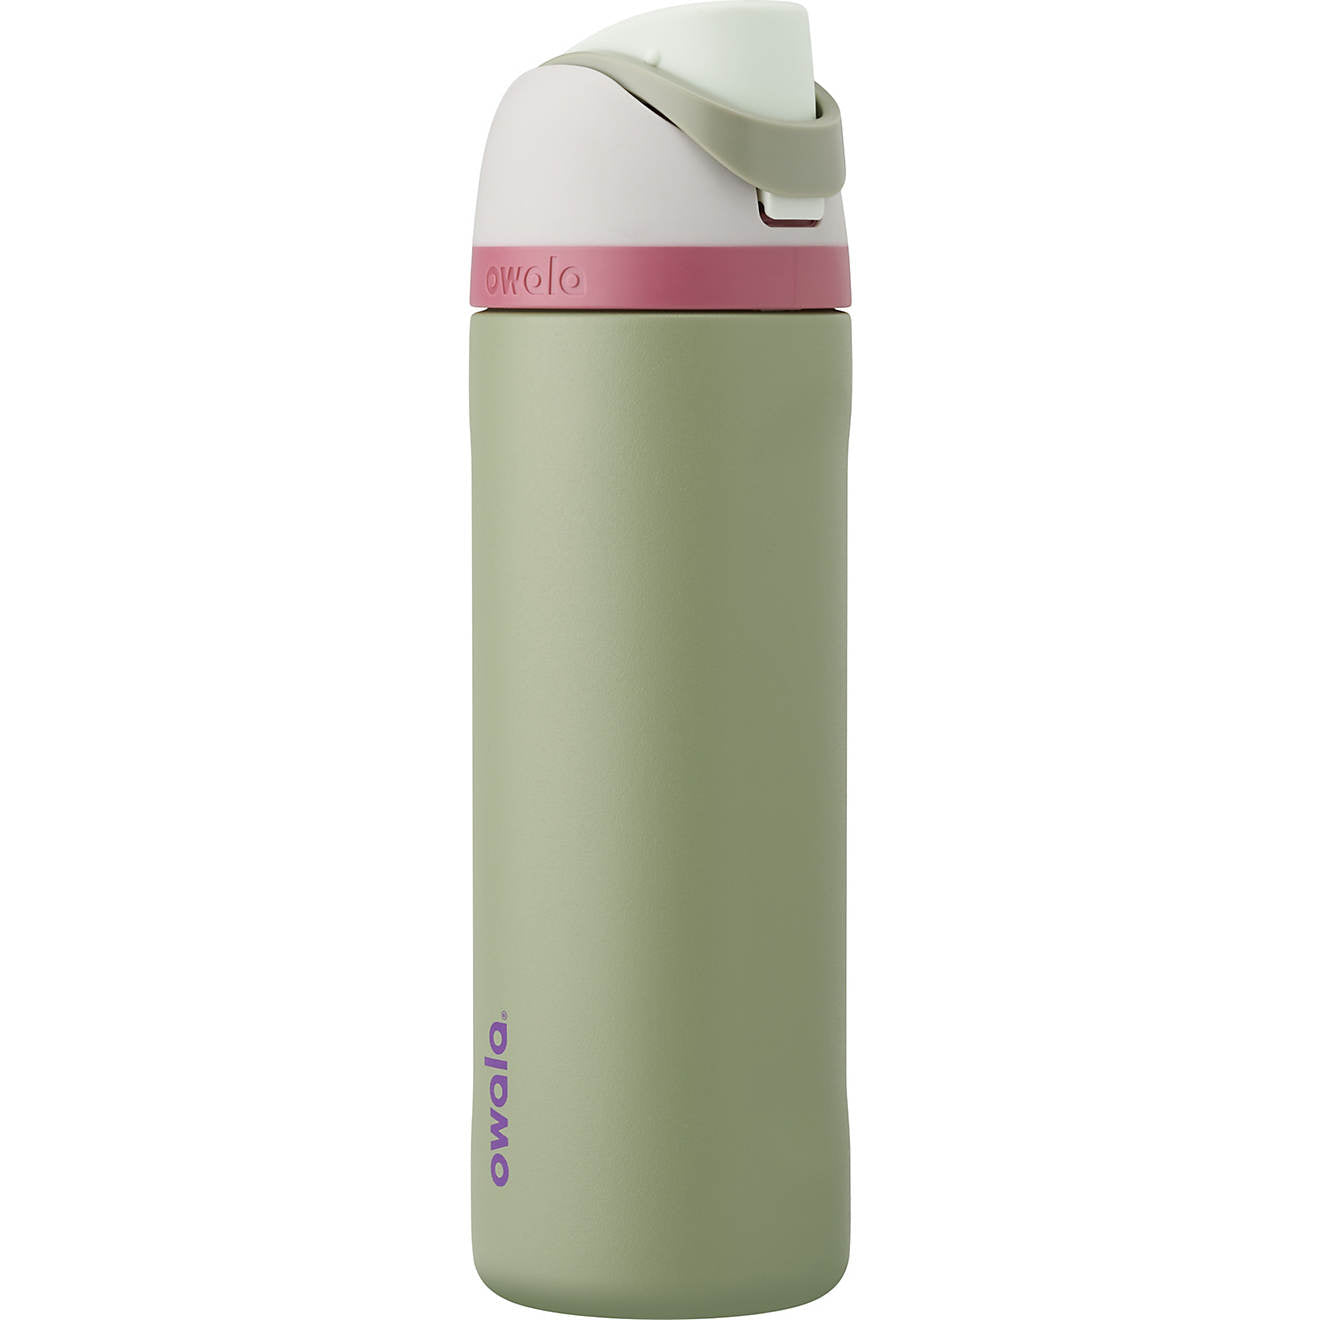 Owala FreeSip 24oz Stainless Steel Water Bottle Teal & Lilac/Pink